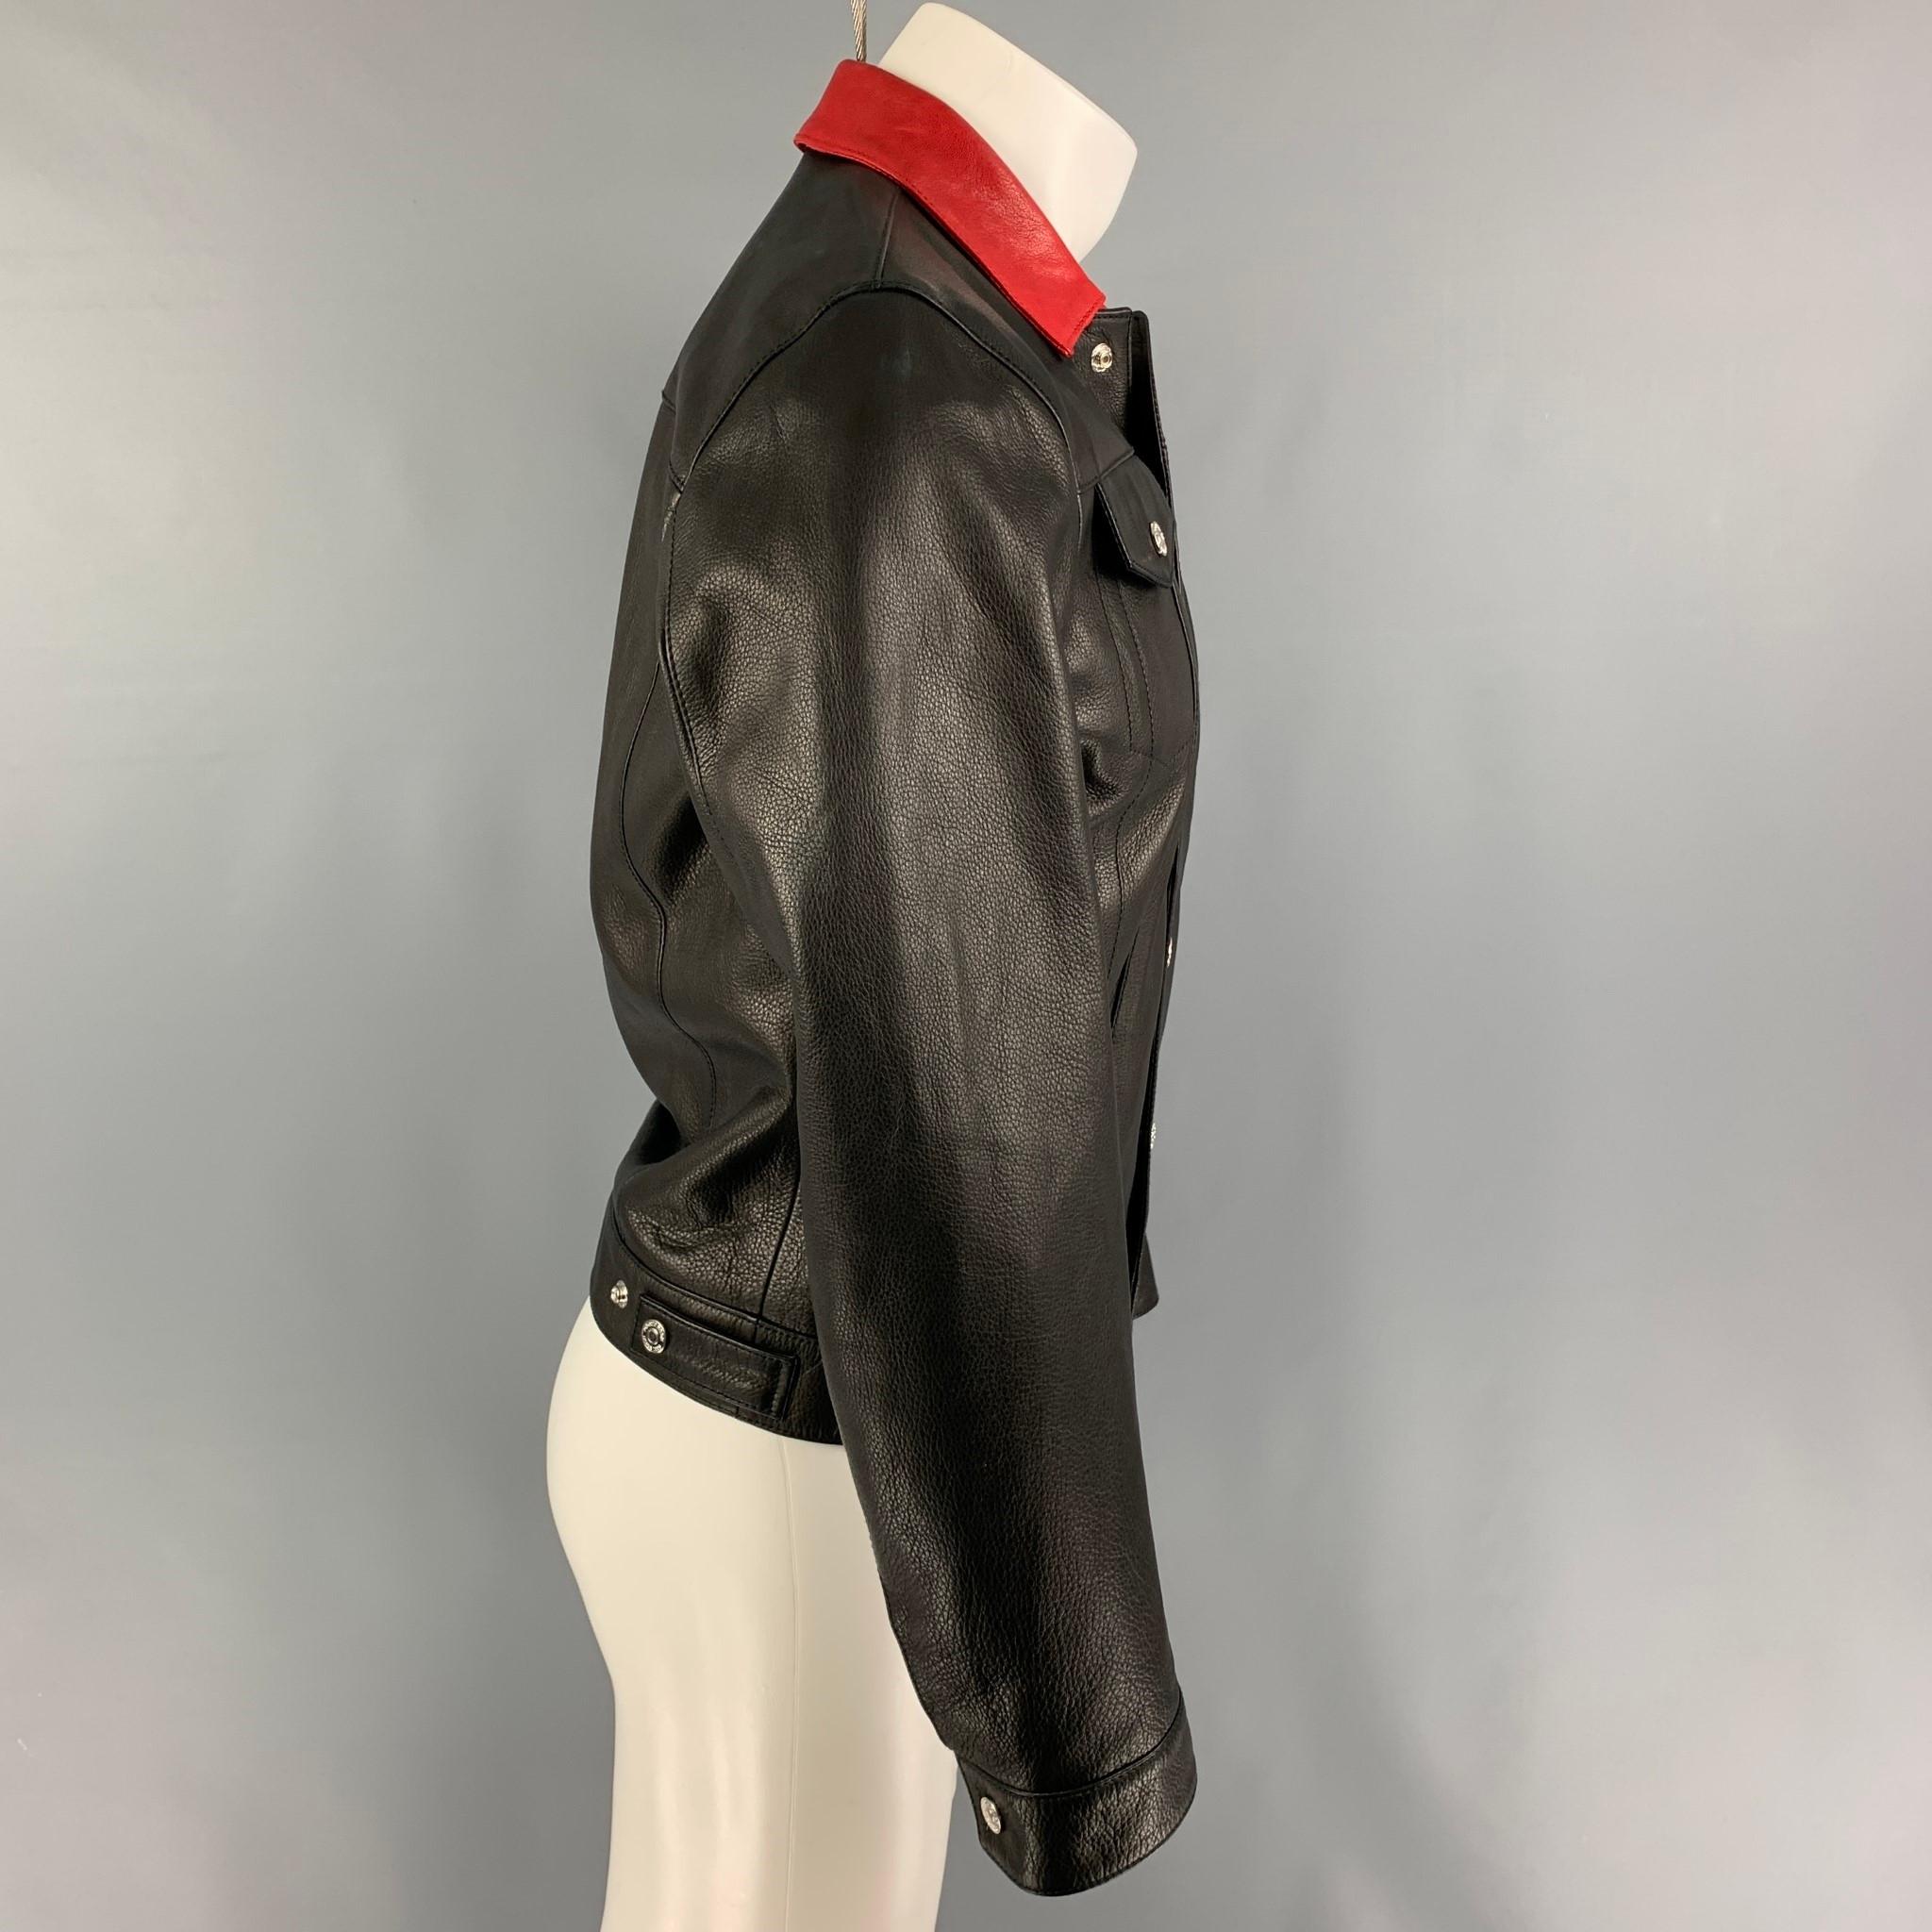 DSQUARED2 jacket comes in a black leather with a full liner featuring a trucker style, red collar, front pockets, and a snap button closure. Made in Italy. 

Good Pre-Owned Condition. Moderate discoloration at back.
Marked: